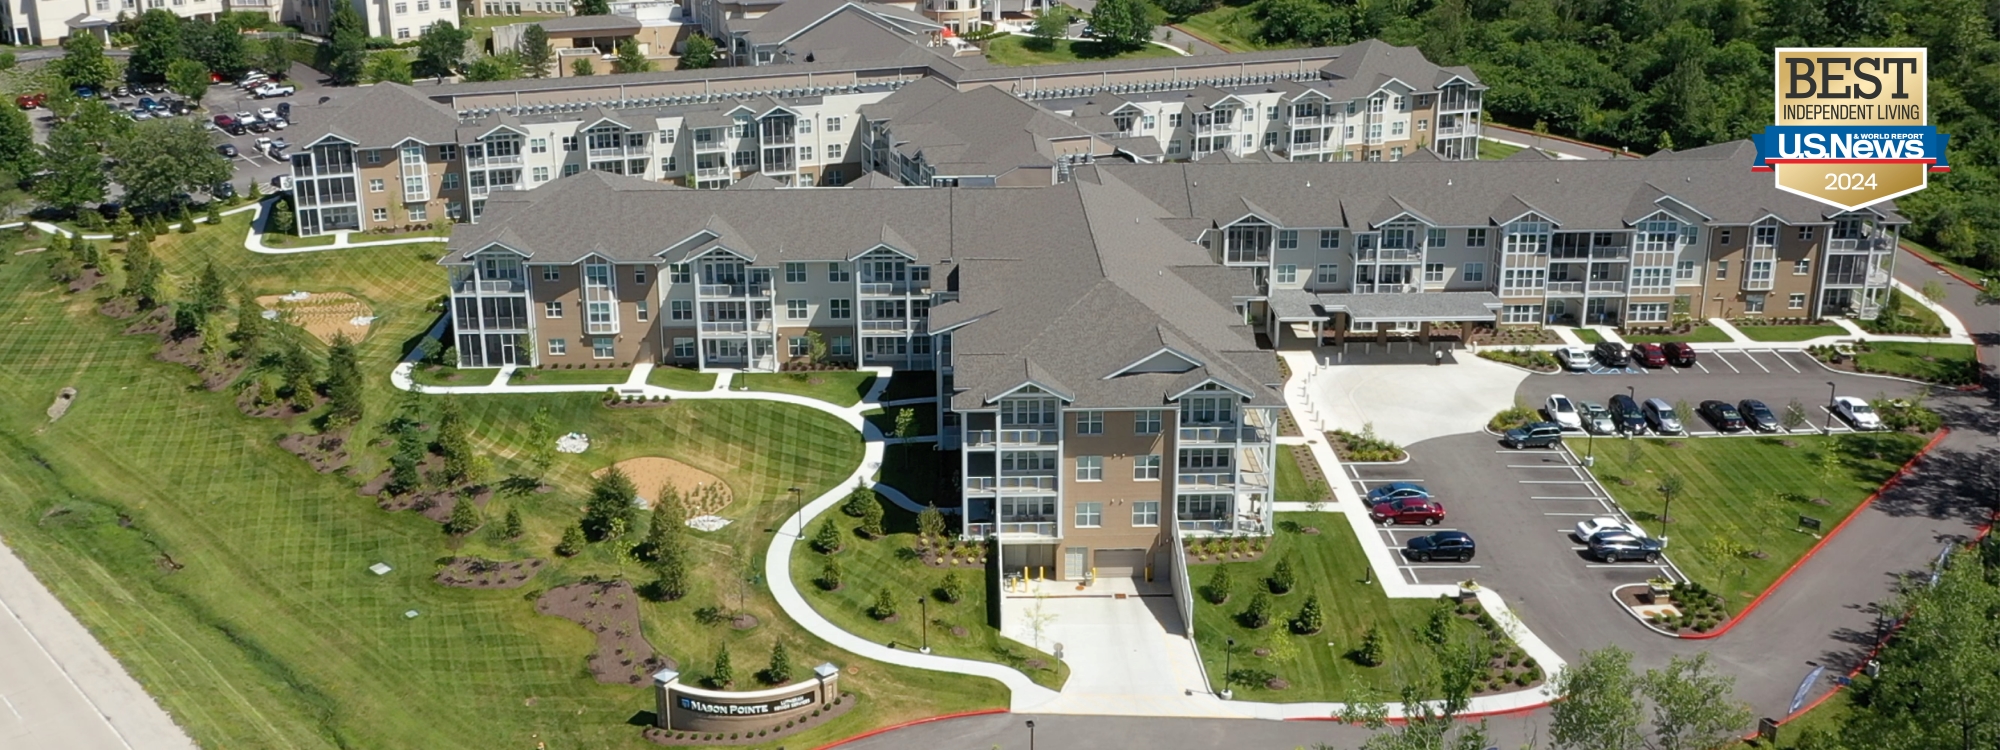 View of the picturesque Mason Pointe assisted living community from above in Chesterfield, MO, awarded Best Independent Living by US News.